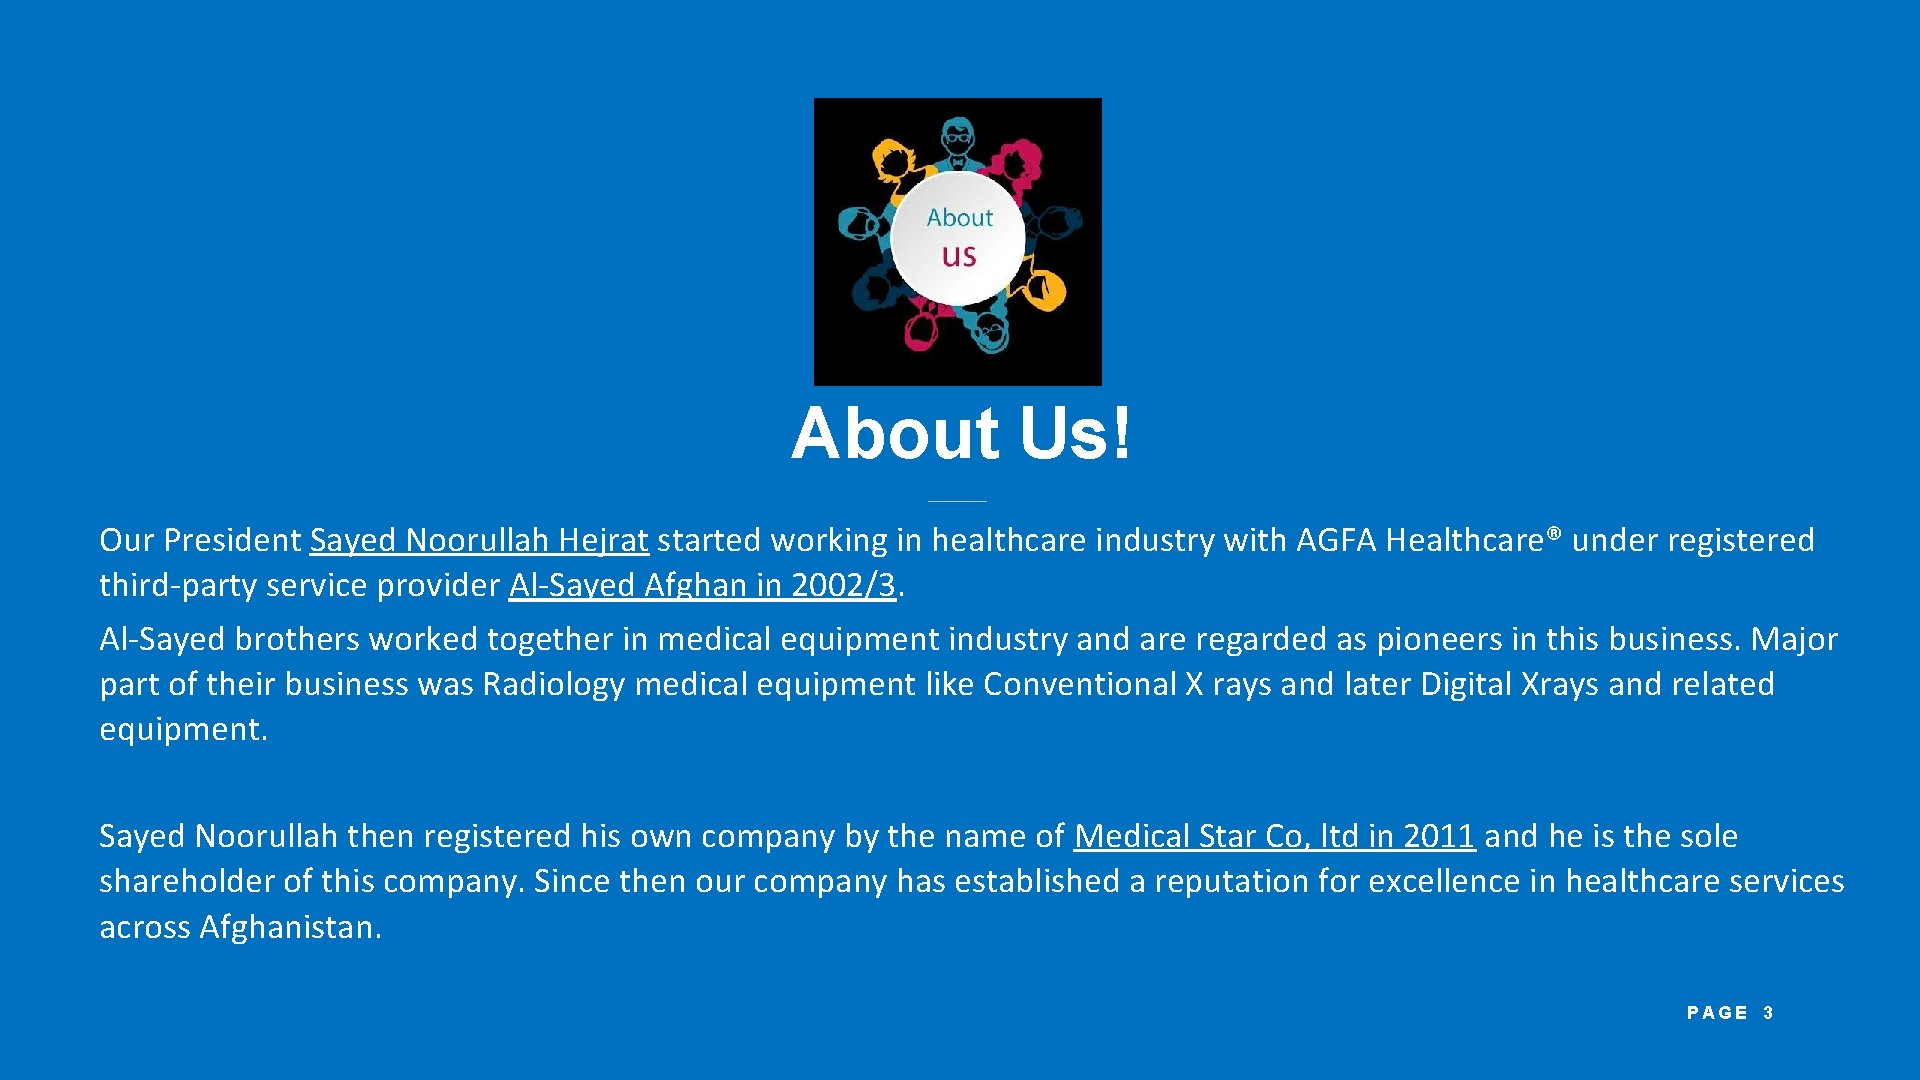 About Us! Our President Sayed Noorullah Hejrat started working in healthcare industry with AGFA